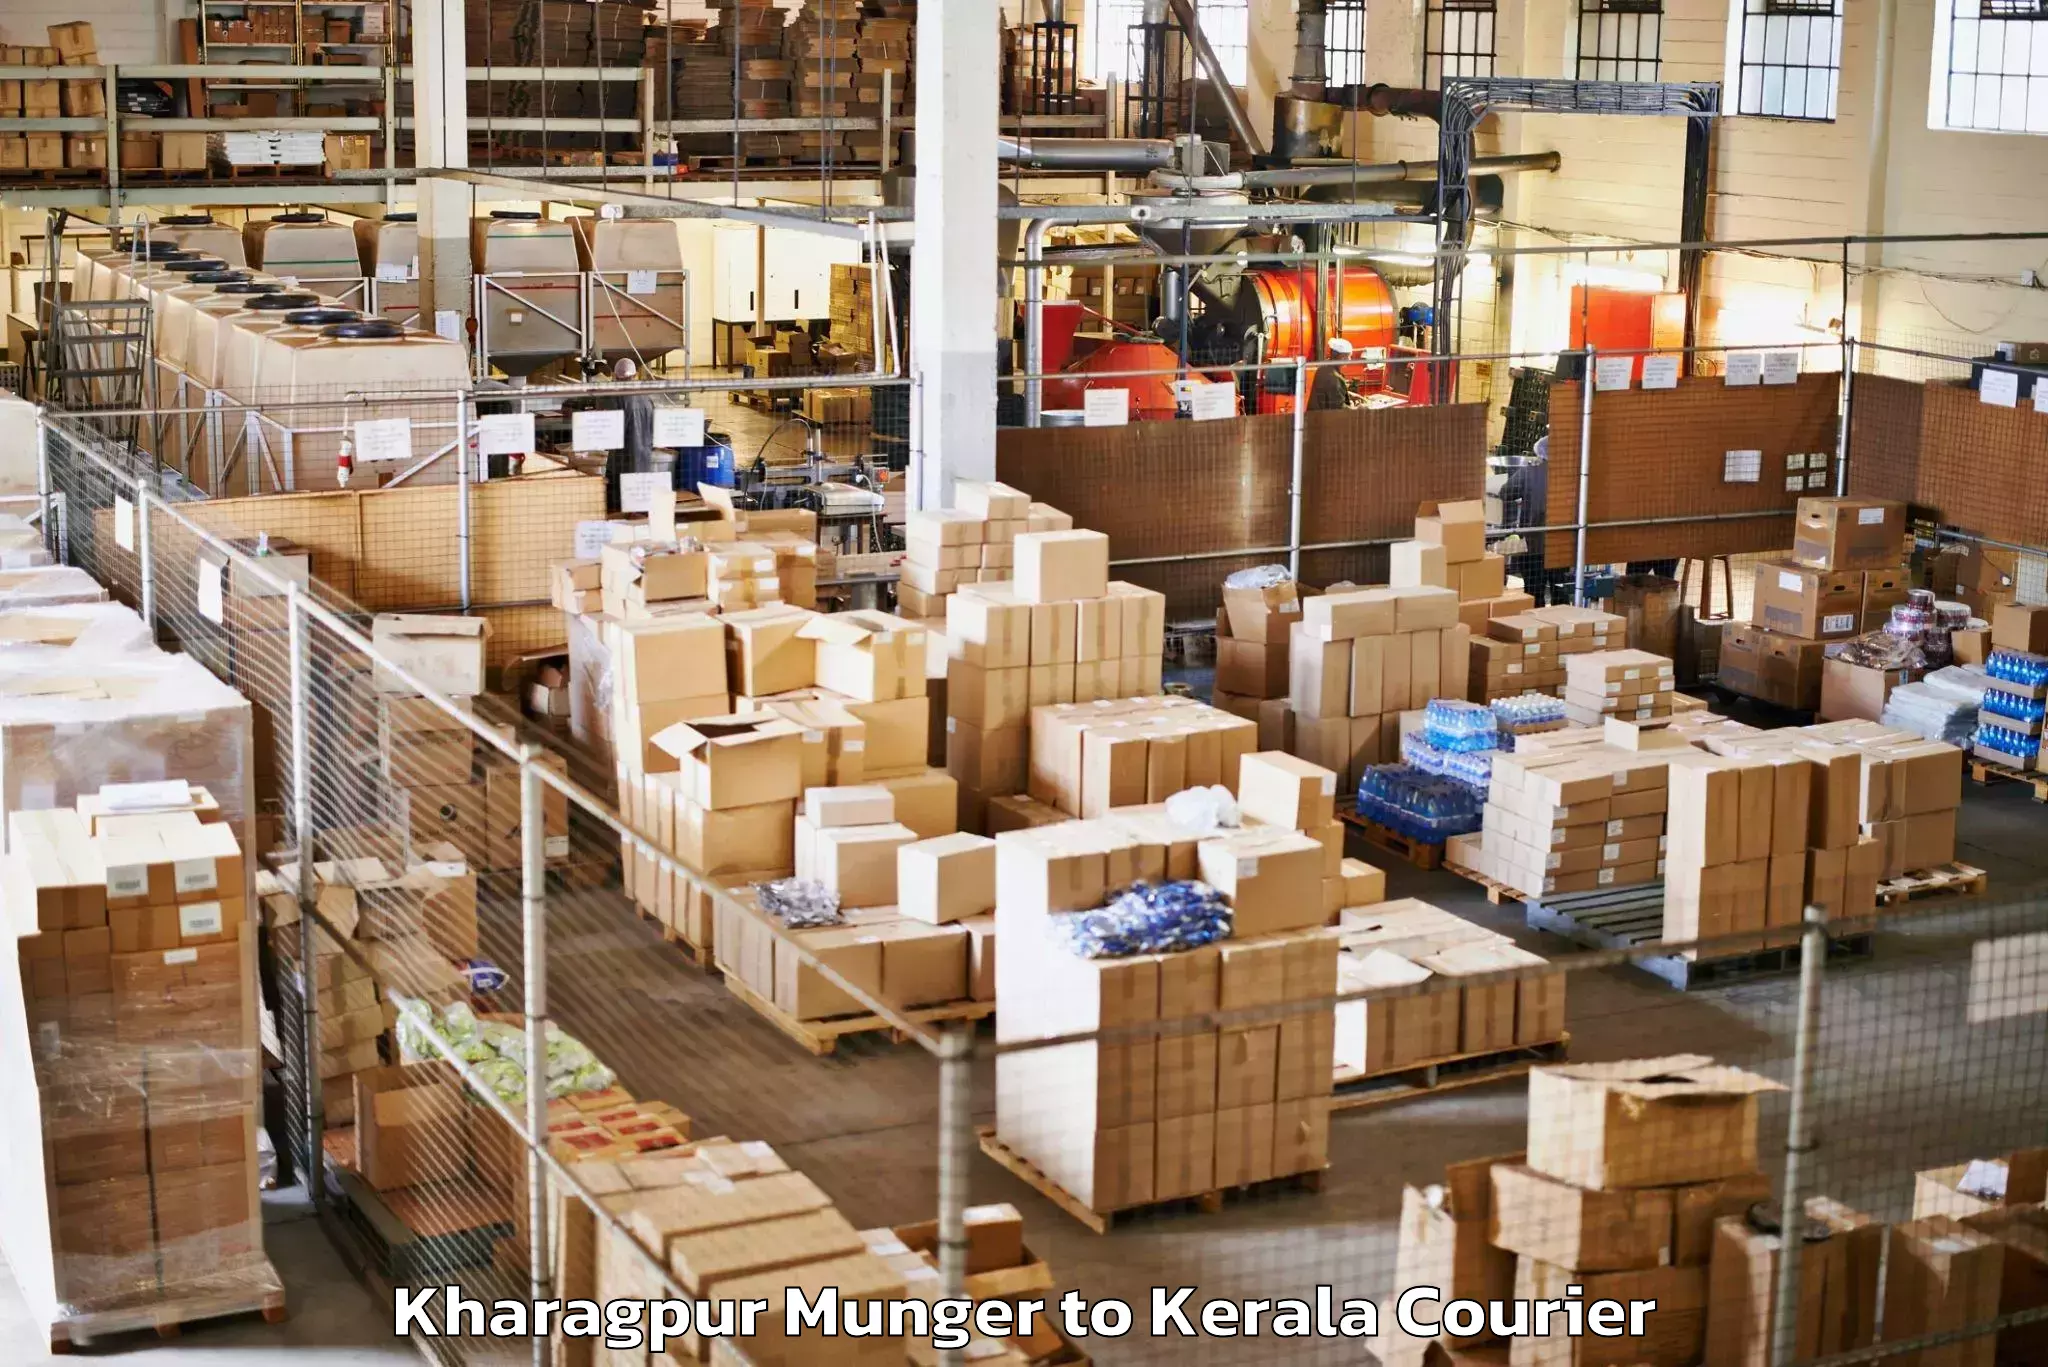 Premium luggage delivery in Kharagpur Munger to Kerala